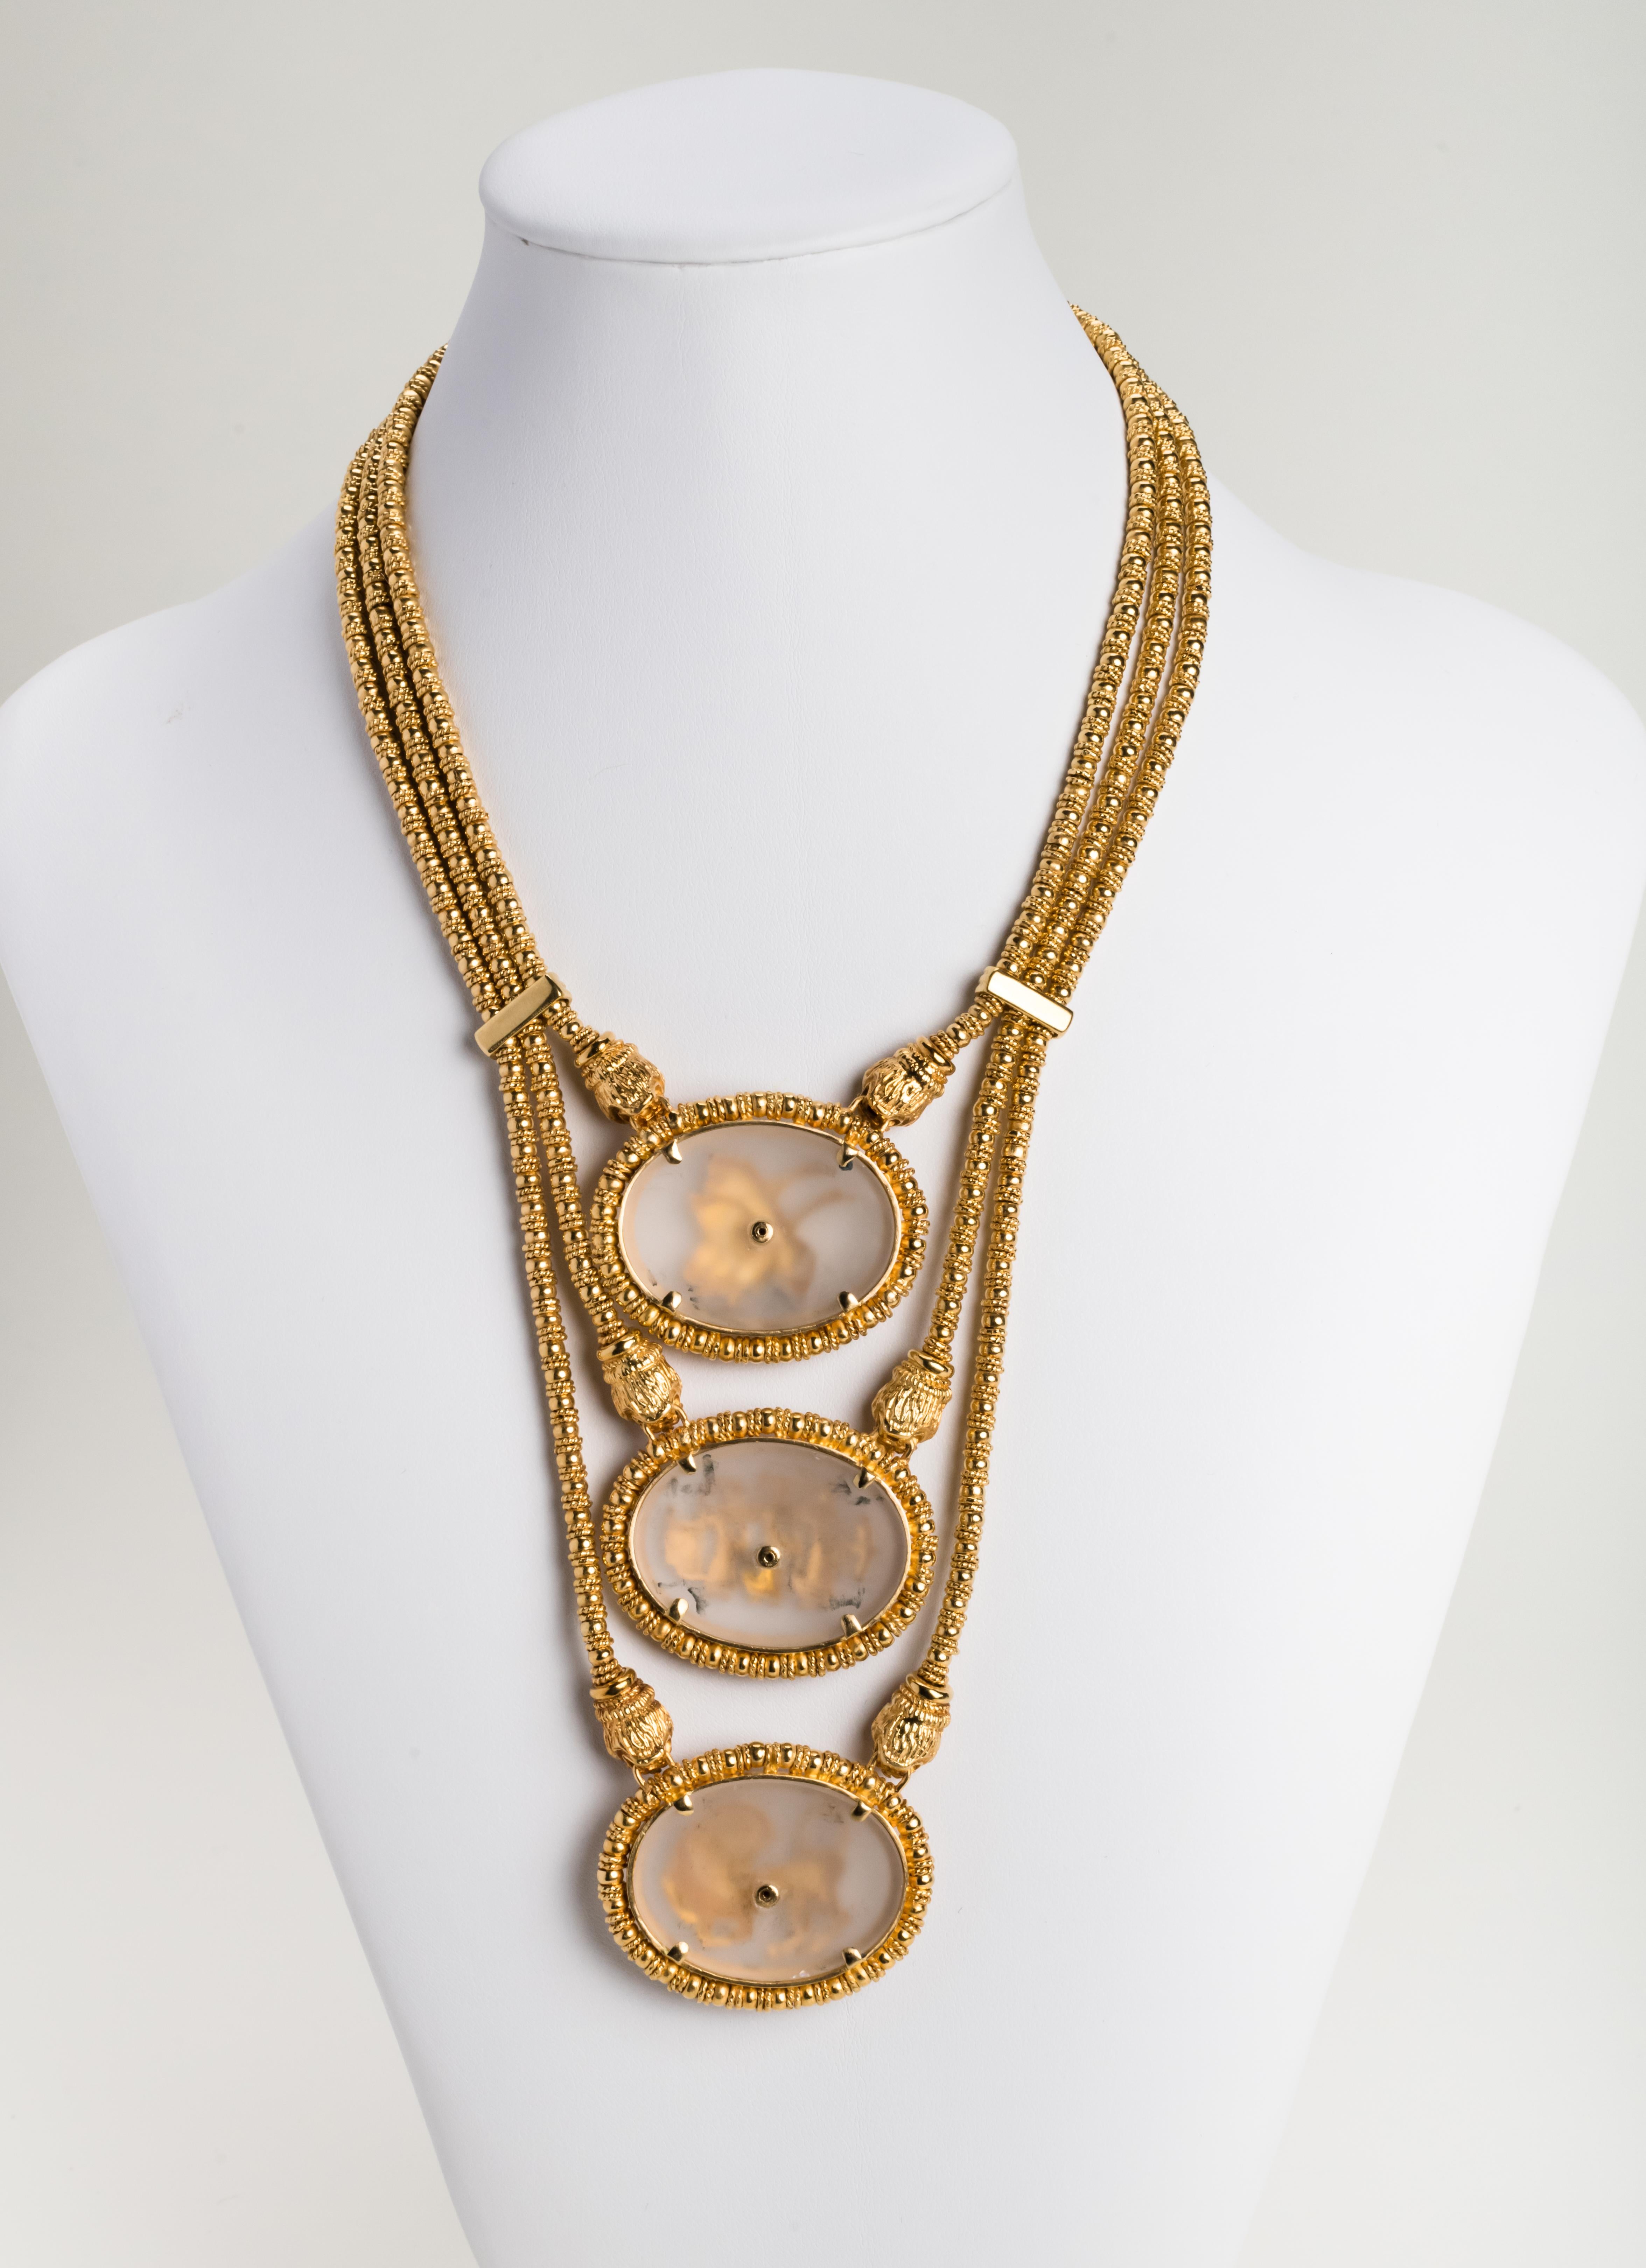 Ilias Lalaounis Triple Stranded Necklace with Three Medallions and Earrings For Sale 4